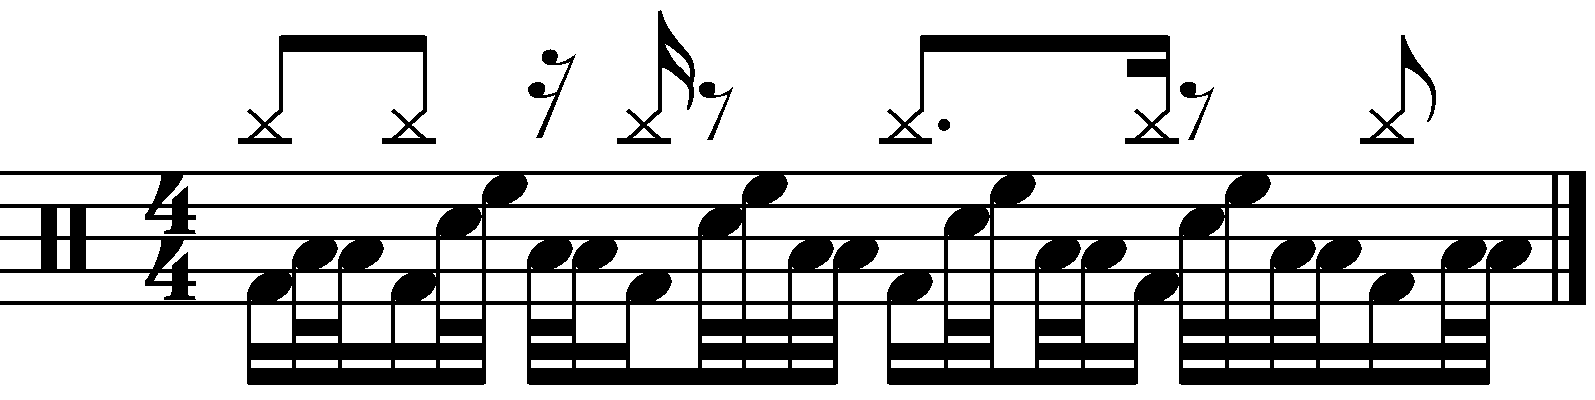 Syncopated 16th note 233332 fills